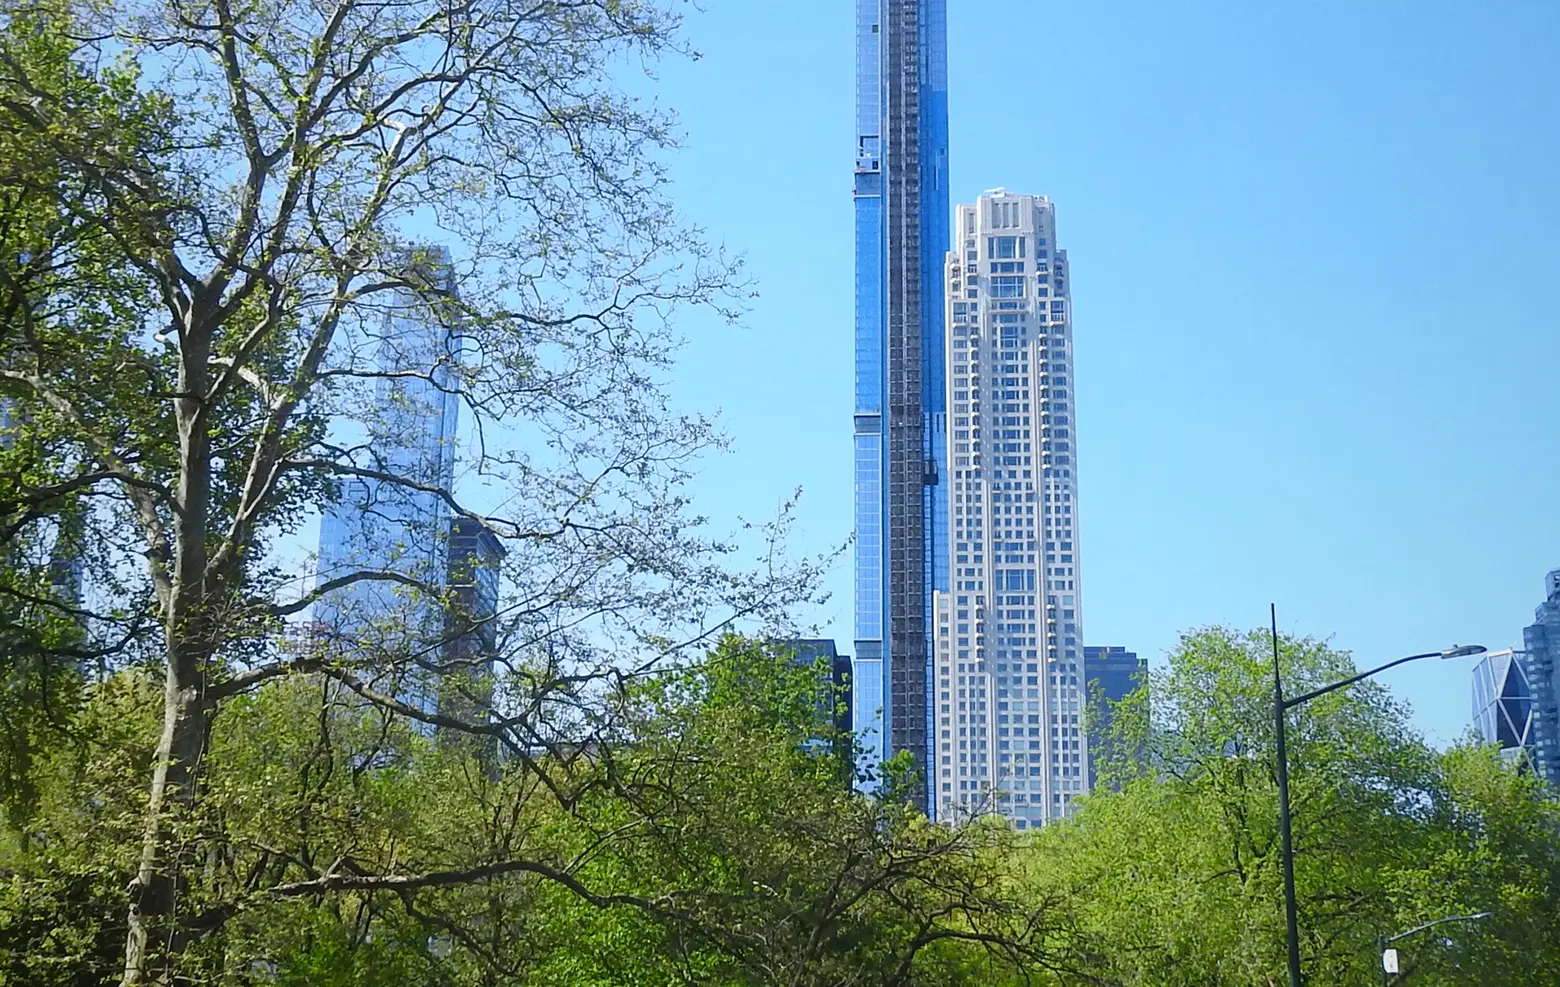 $80M penthouse sale at 220 Central Park South is one of year’s biggest deals